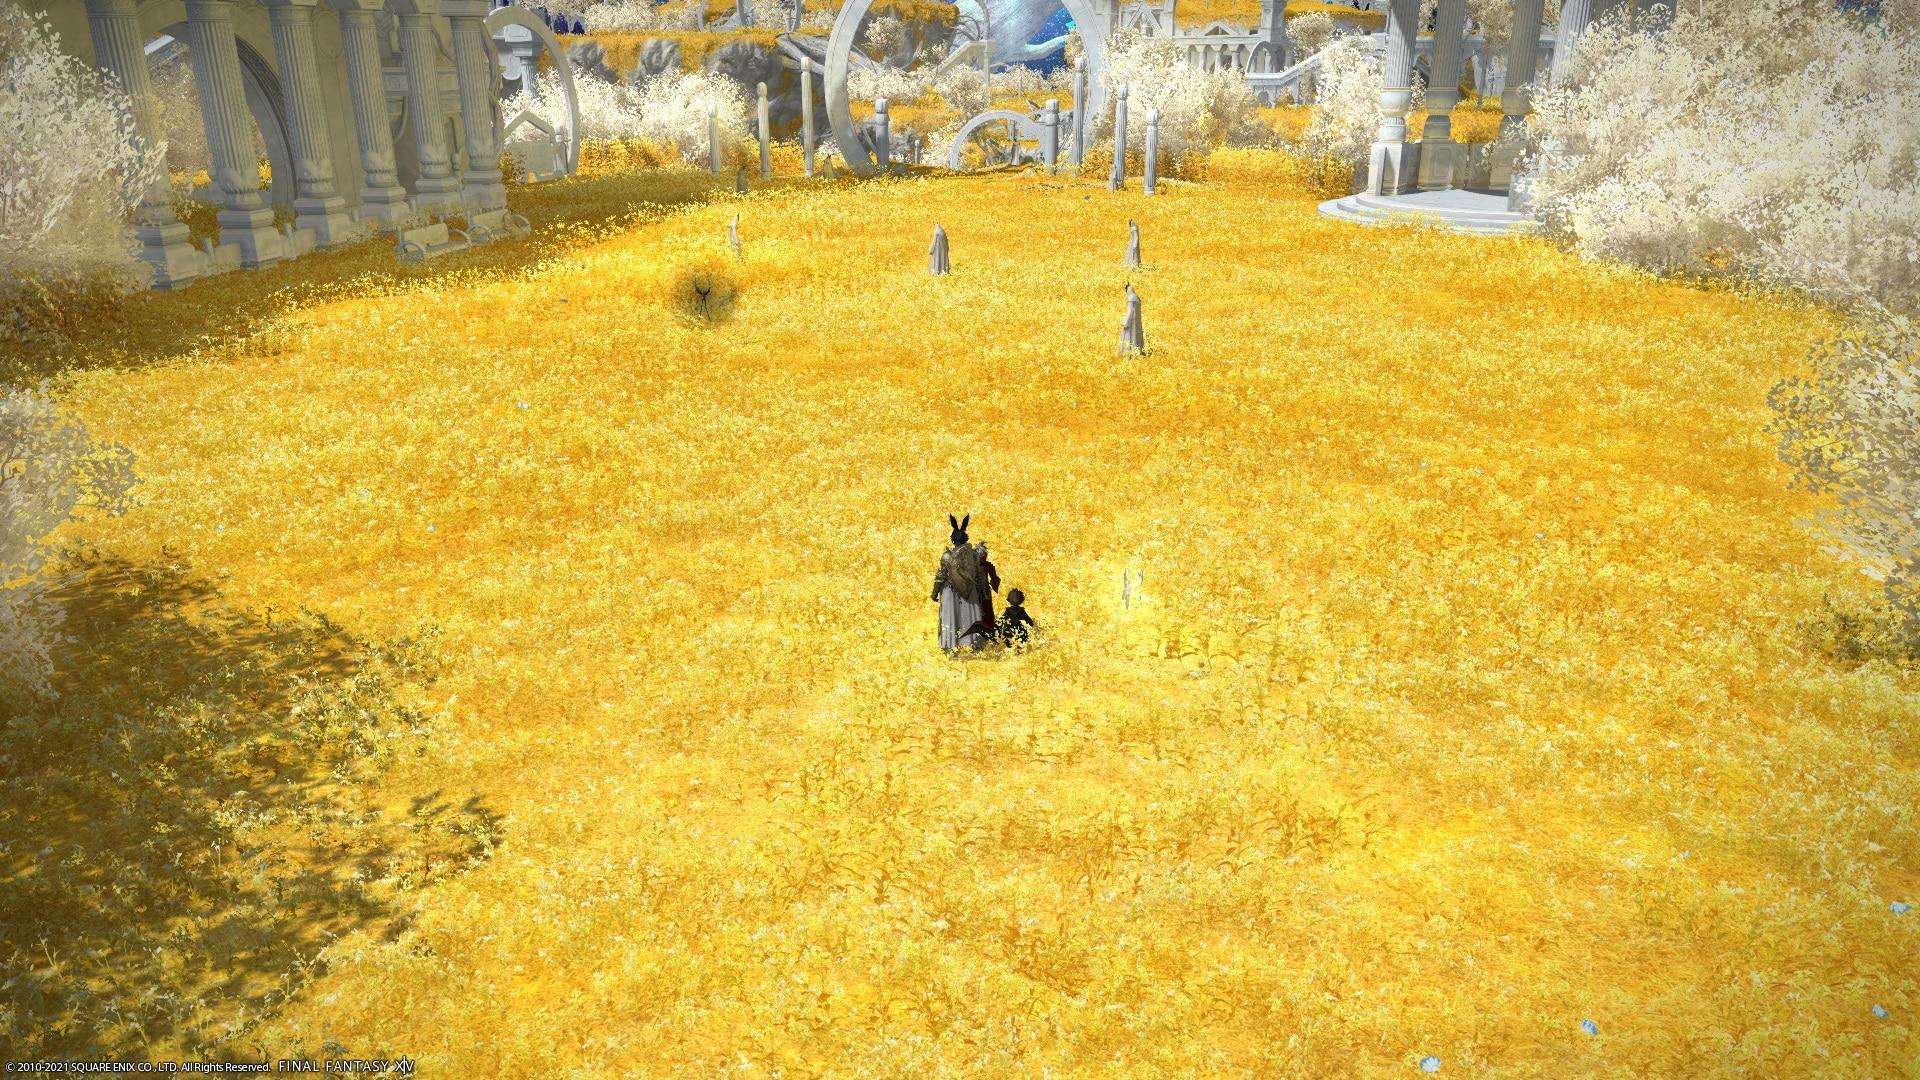 FFXIV screenshot showing the Dead Ends dungeon